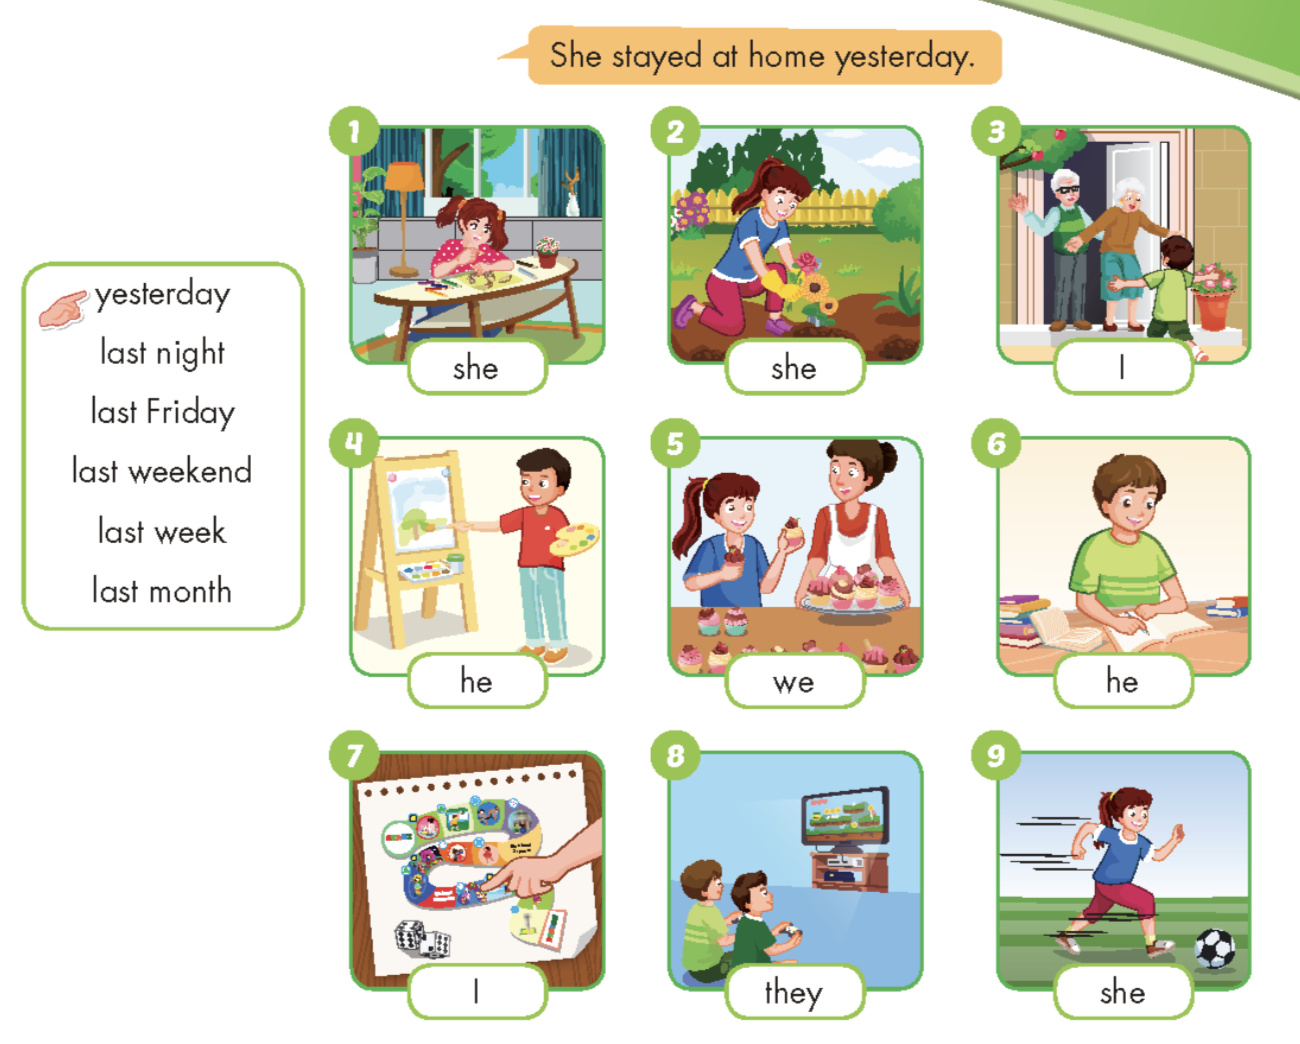 Tiếng Anh lớp 5 Unit 3: My friends and I - ilearn Smart Start (ảnh 27)